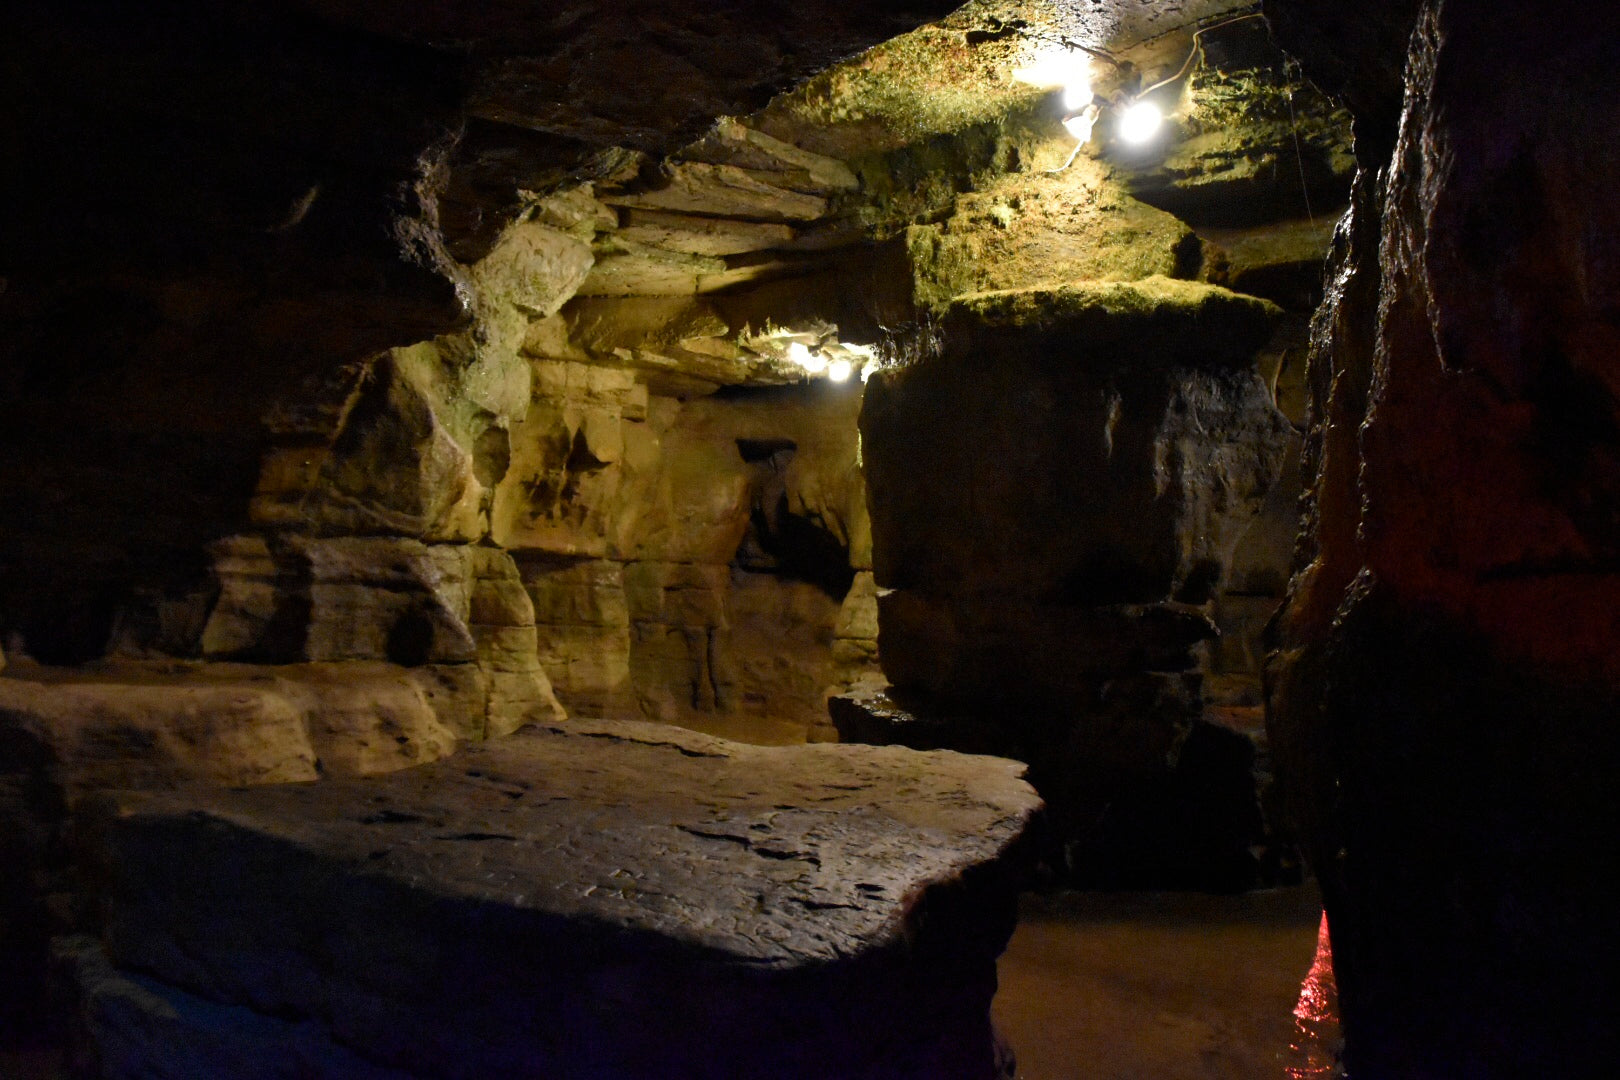 Olentangy Indian caverns council hall